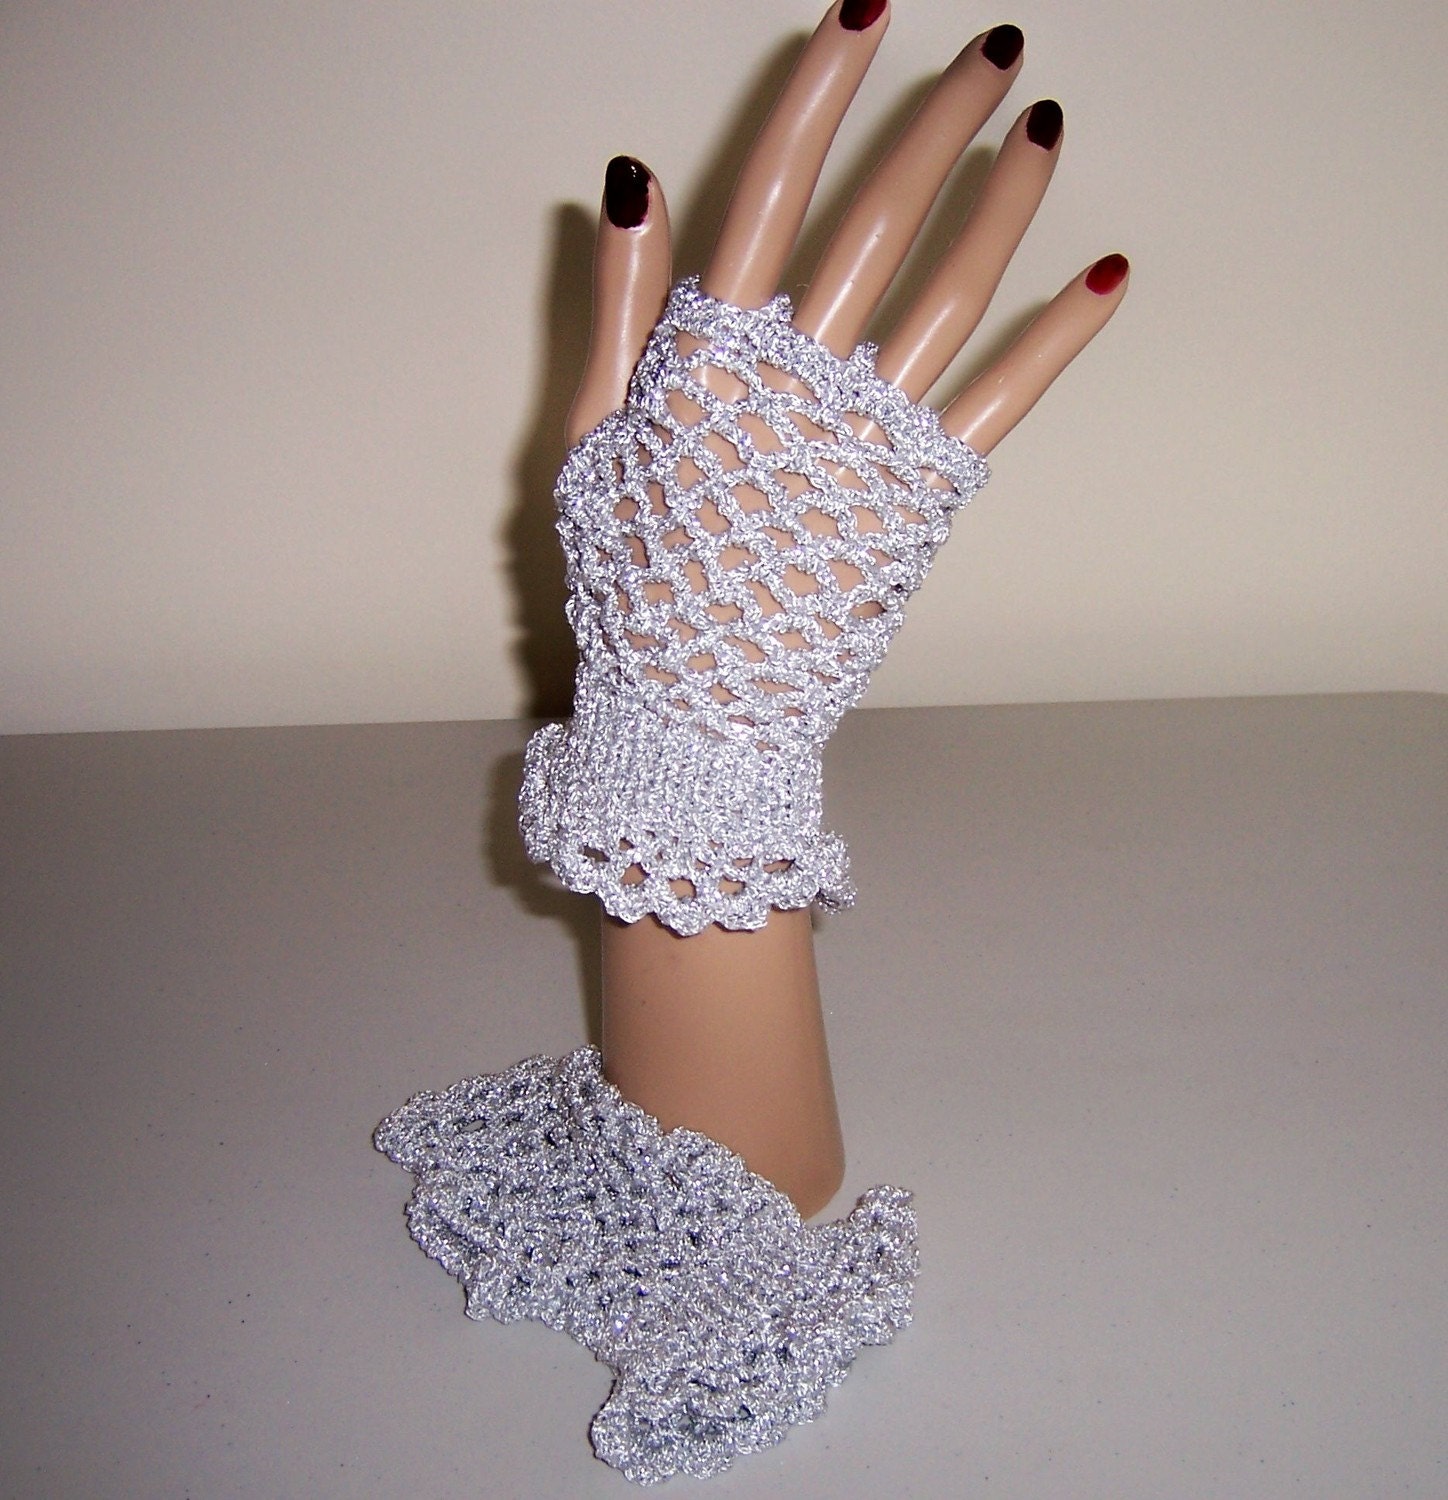 Fingerless Lace Glove, Frilled at Wrist, Silver